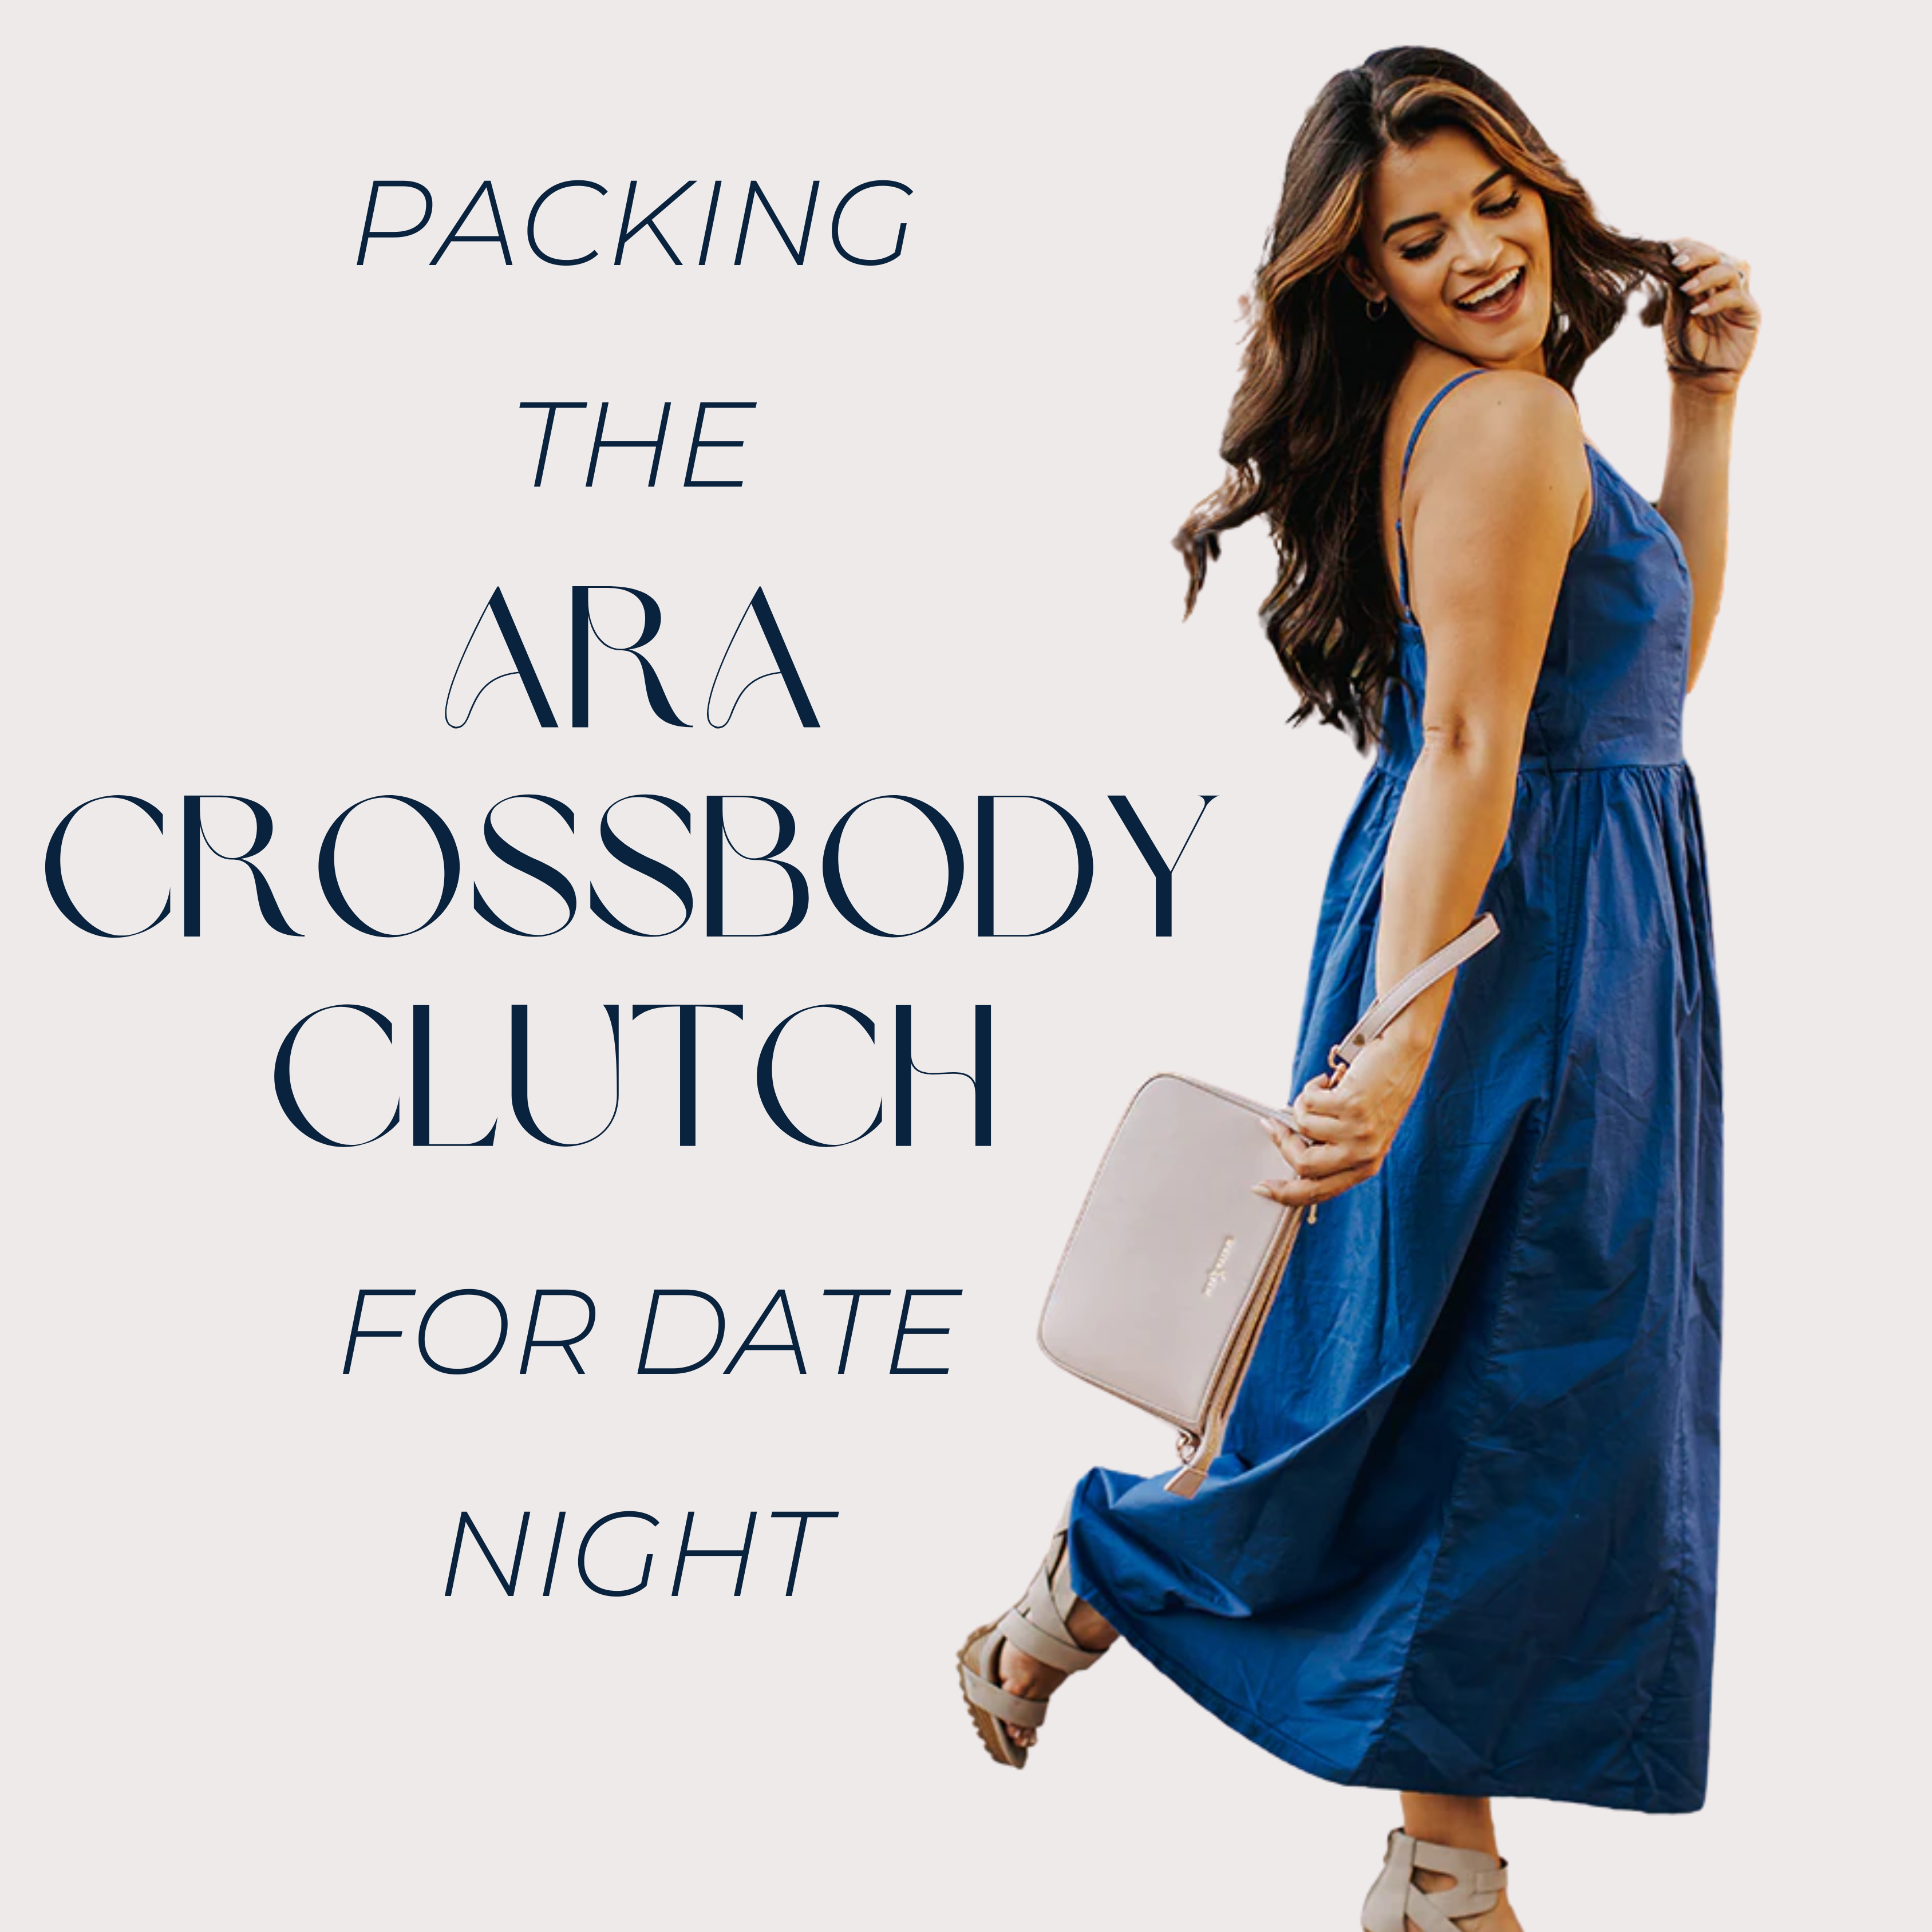 Packing the Ara Crossbody Clutch for Date Night